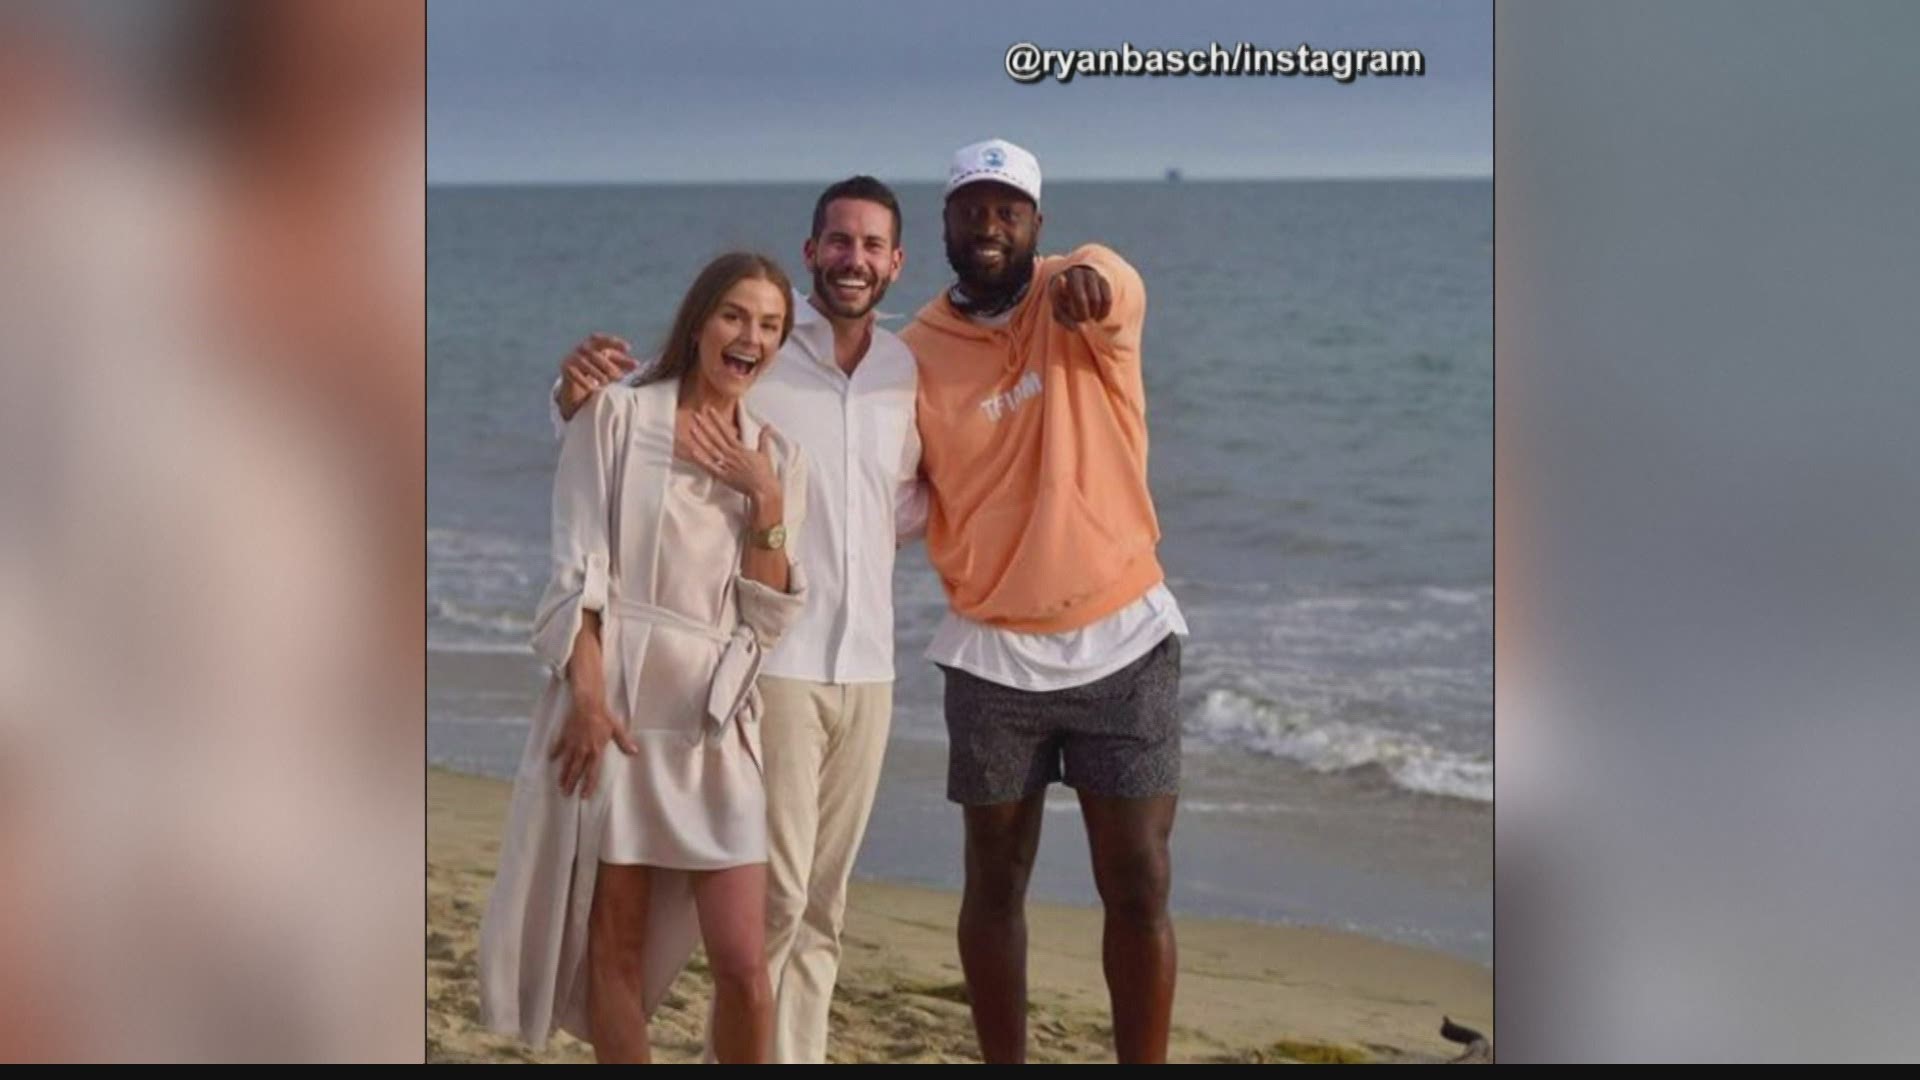 Former NBA All-Star Dwyane Wade was taking a sunset stroll on a California beach when he accidentally photobombed a couple's proposal.